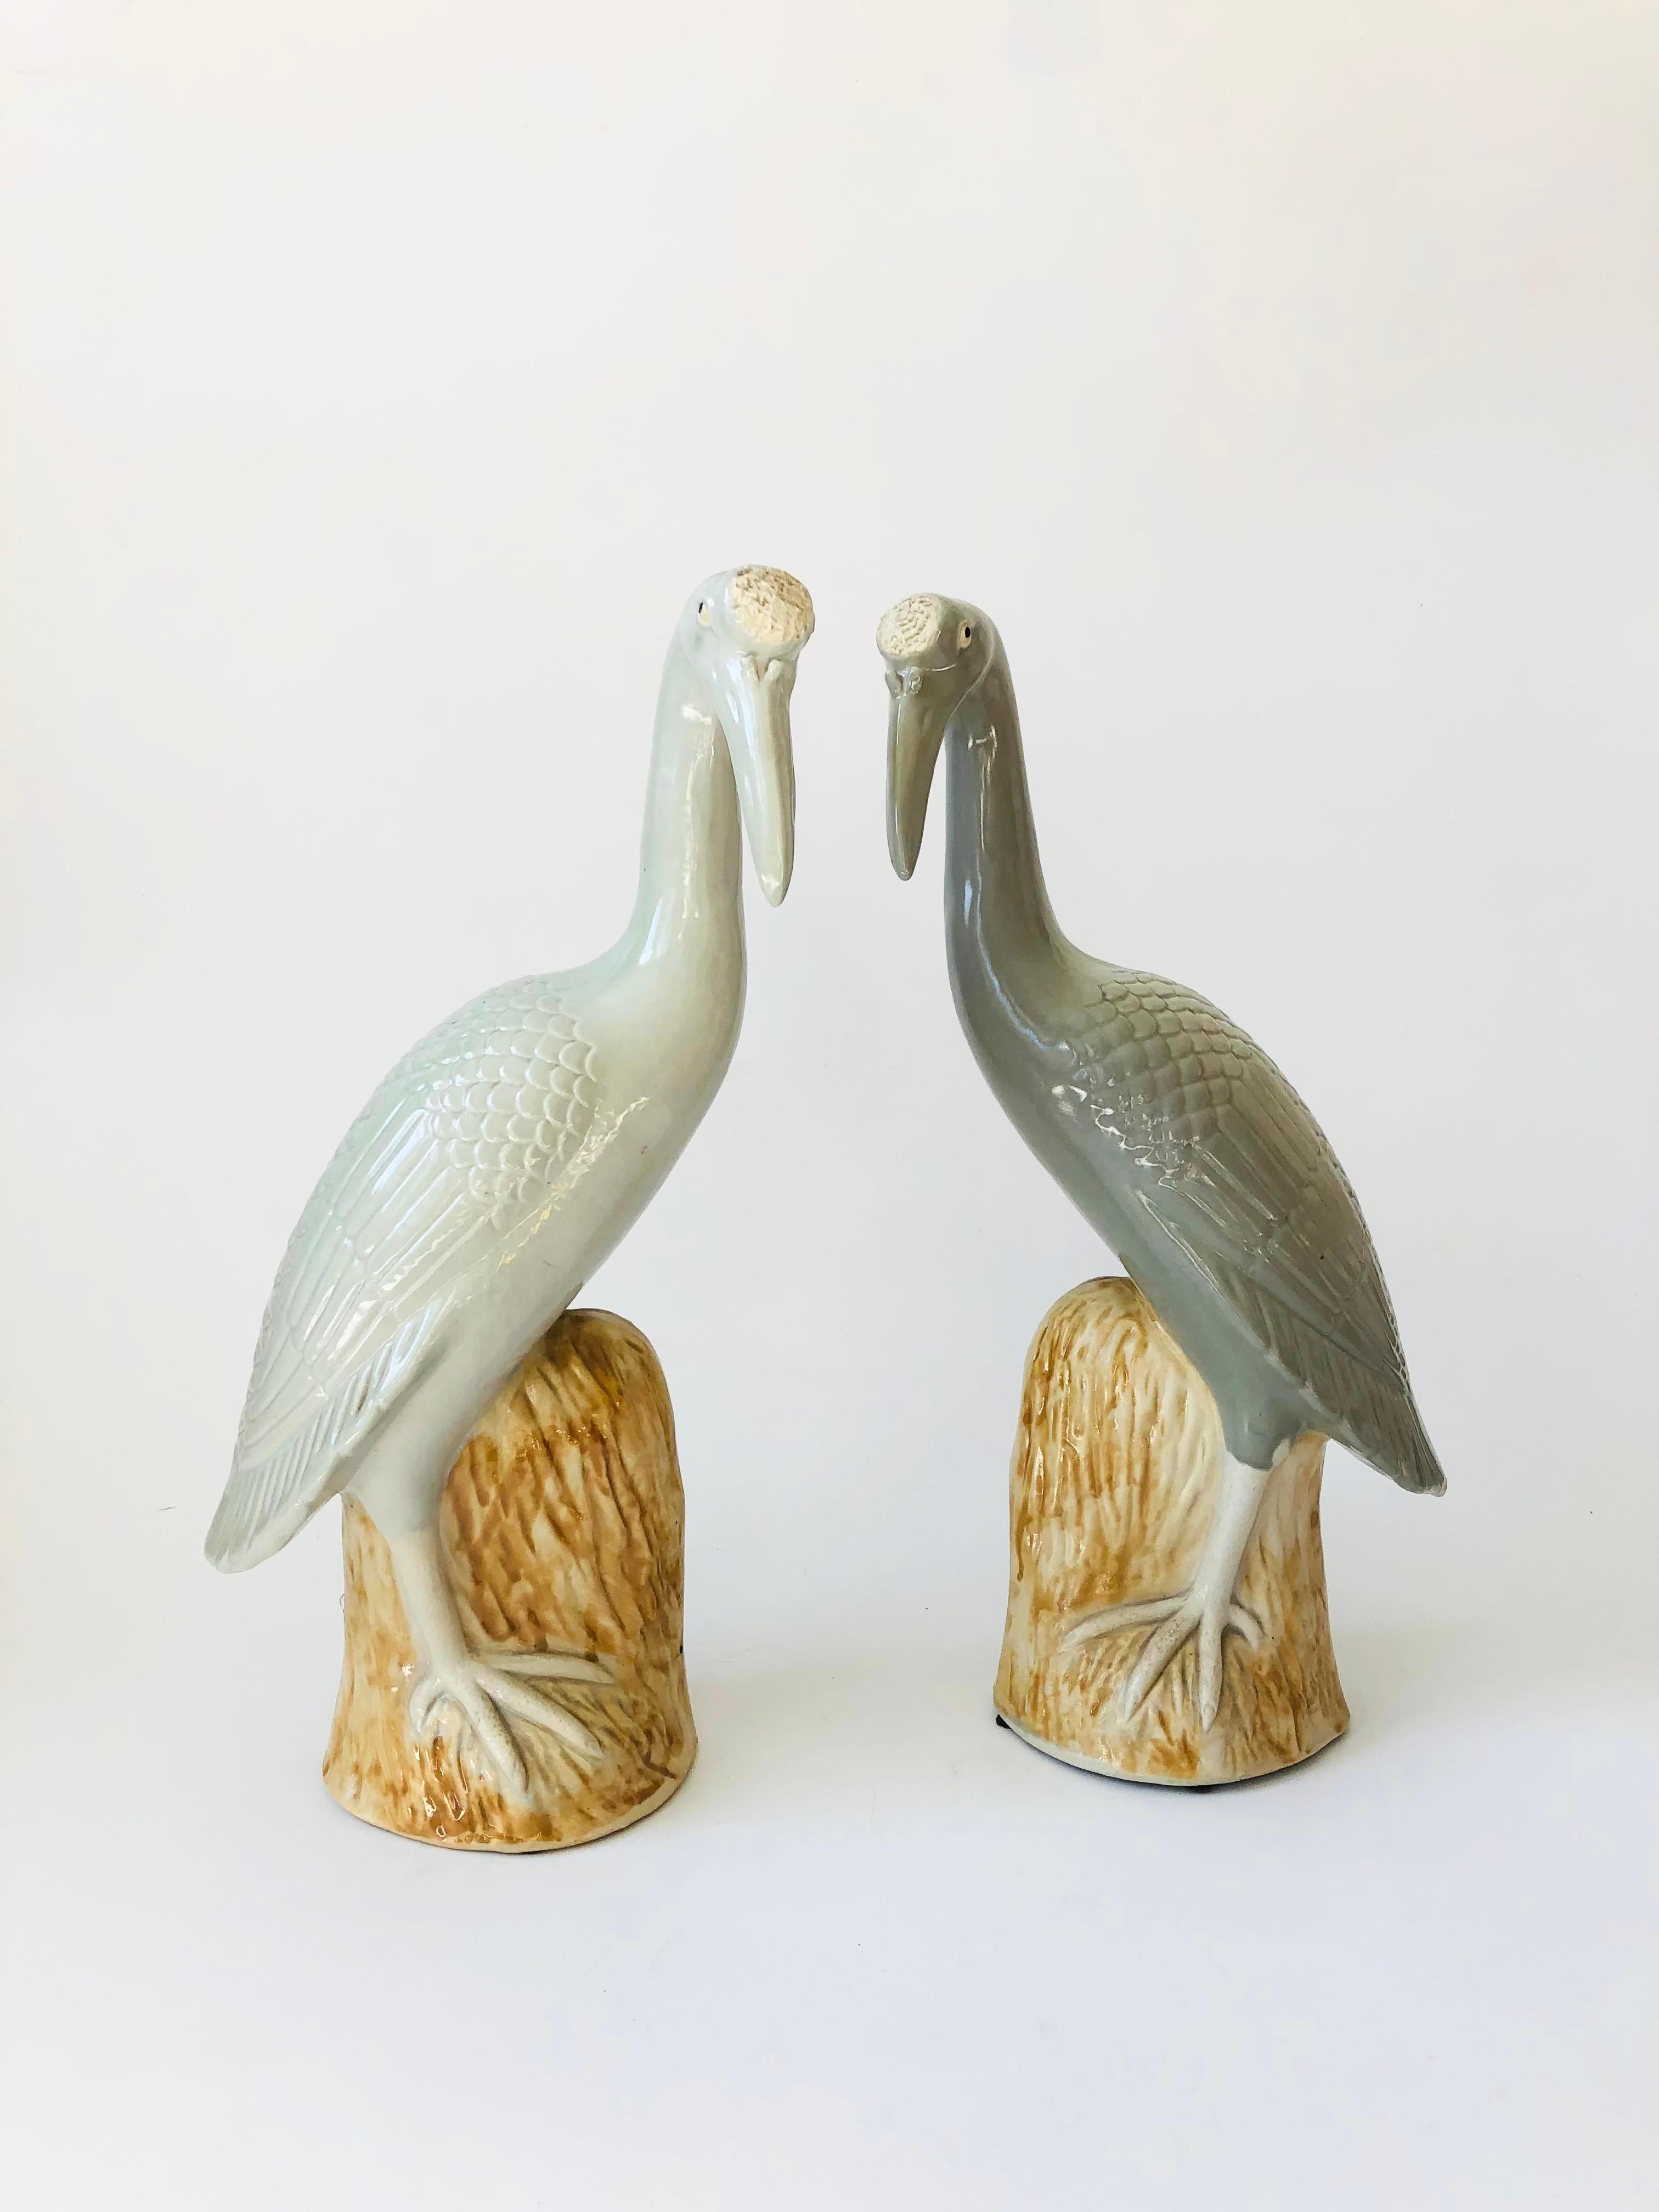 A pair of Chinese porcelain cranes. Beautiful detailed, gracefully perched on faux wood bases. Pale gray and white glazes with tan glaze to the bases. Nice large size to use as statement pieces. Each is stamped on the base by the maker. Estimated